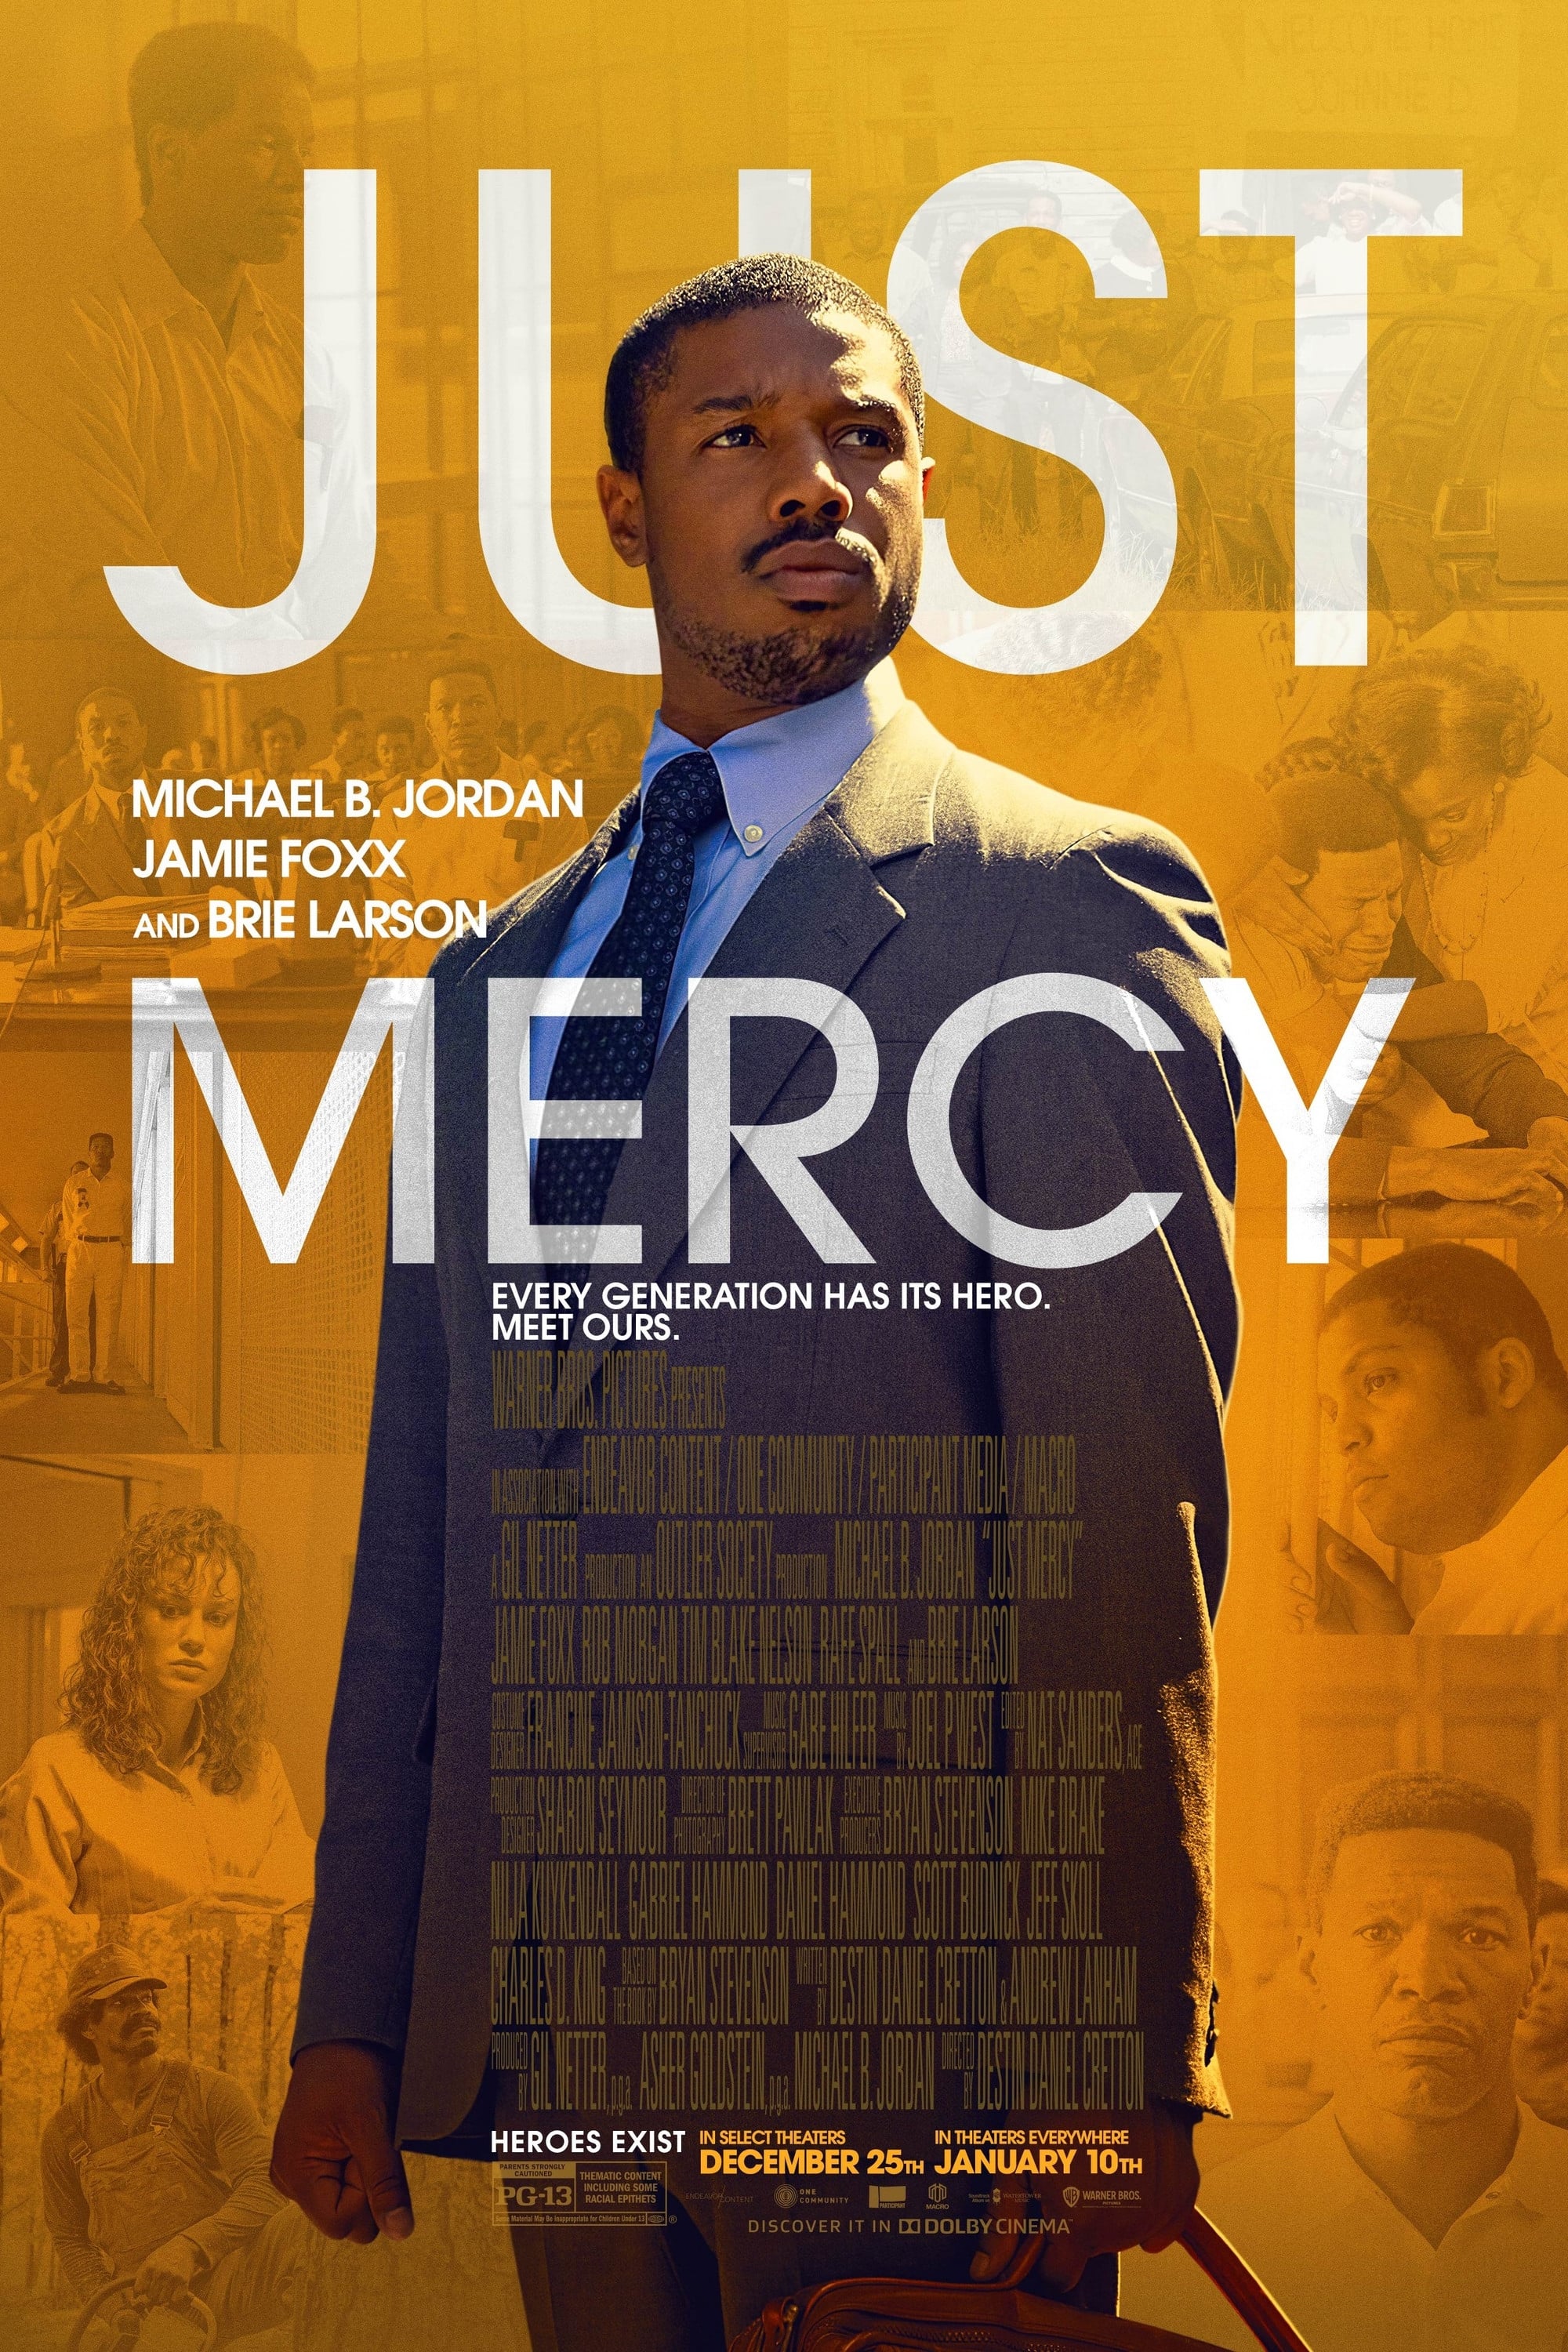 just mercy movie assignment